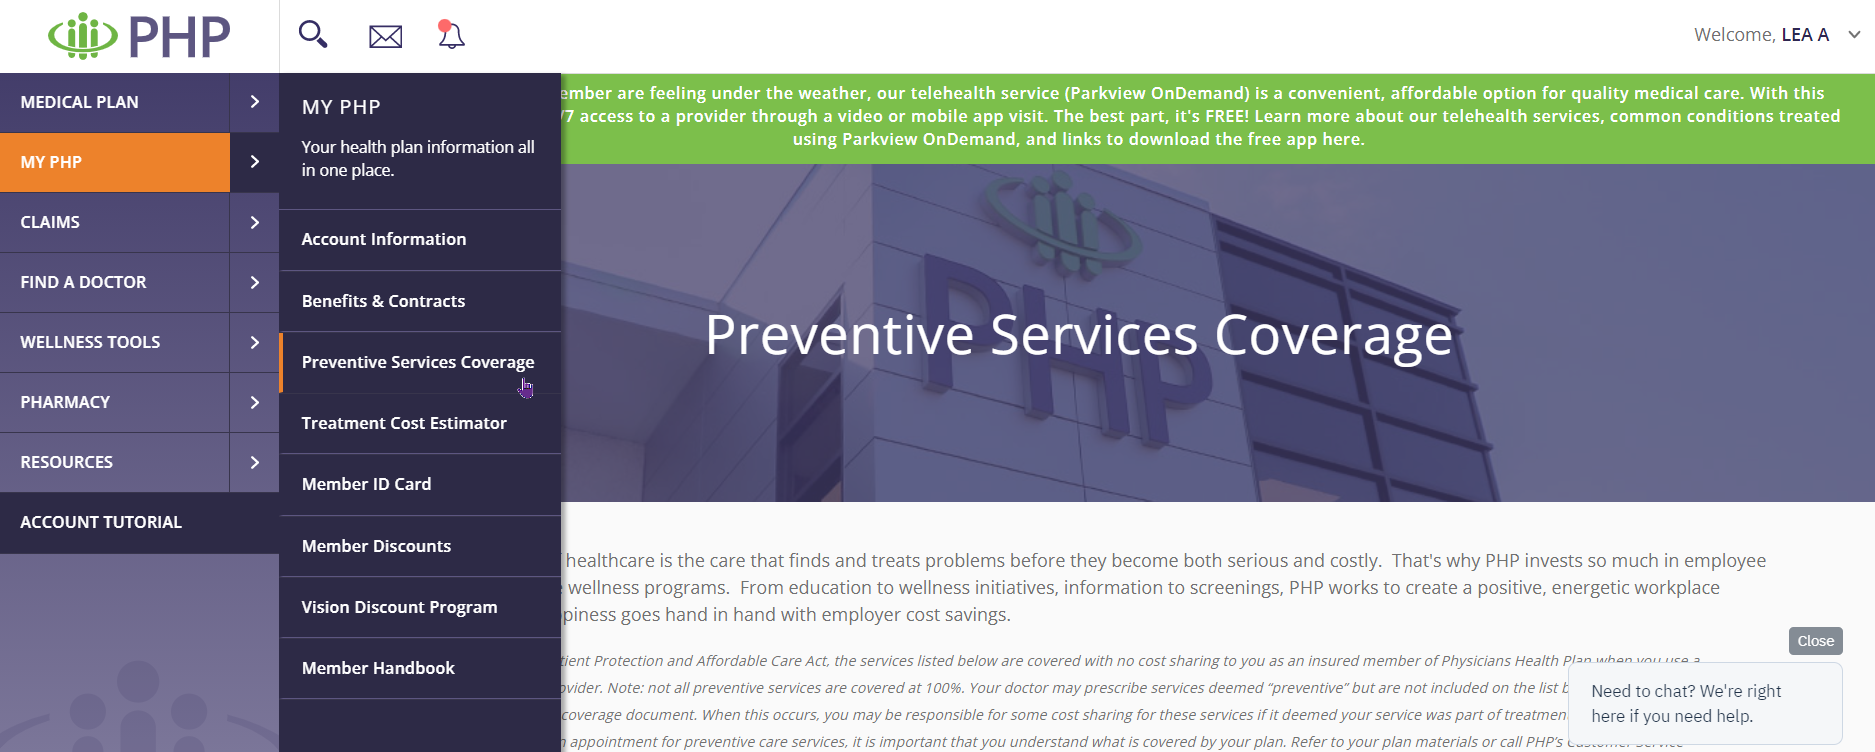 Preventive Services Coverage displayed on the PHP website 